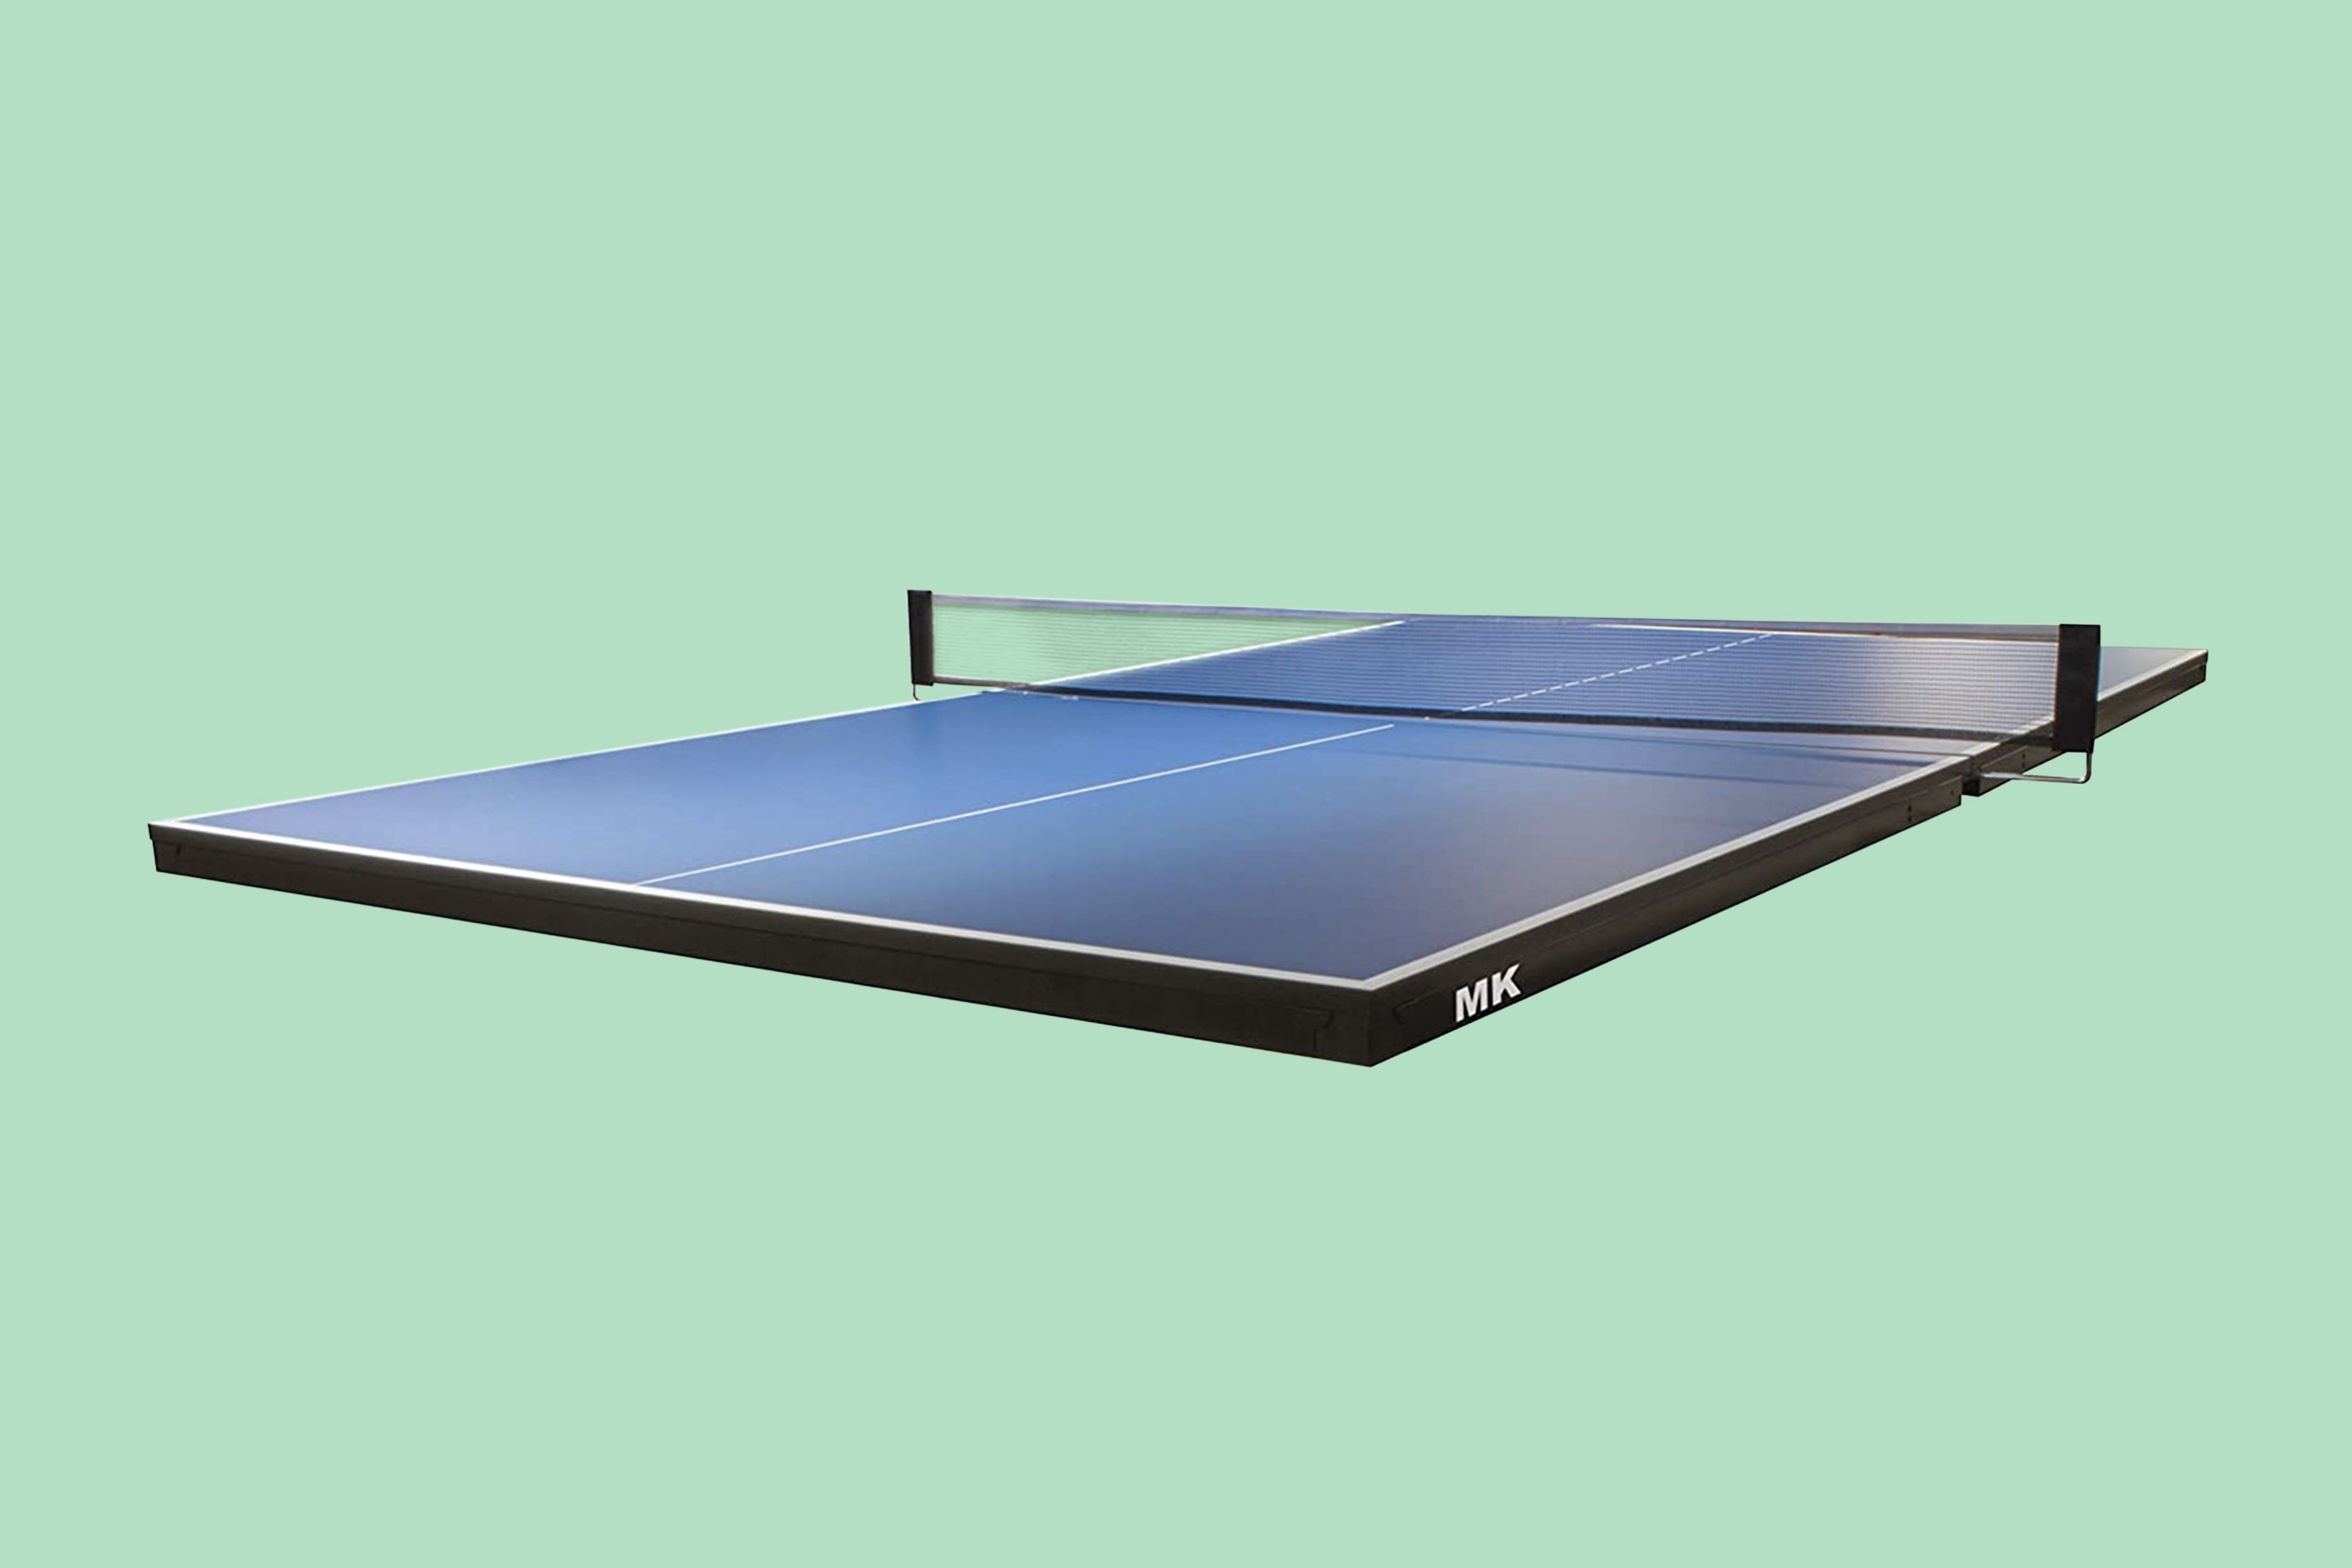 Best ping pong table